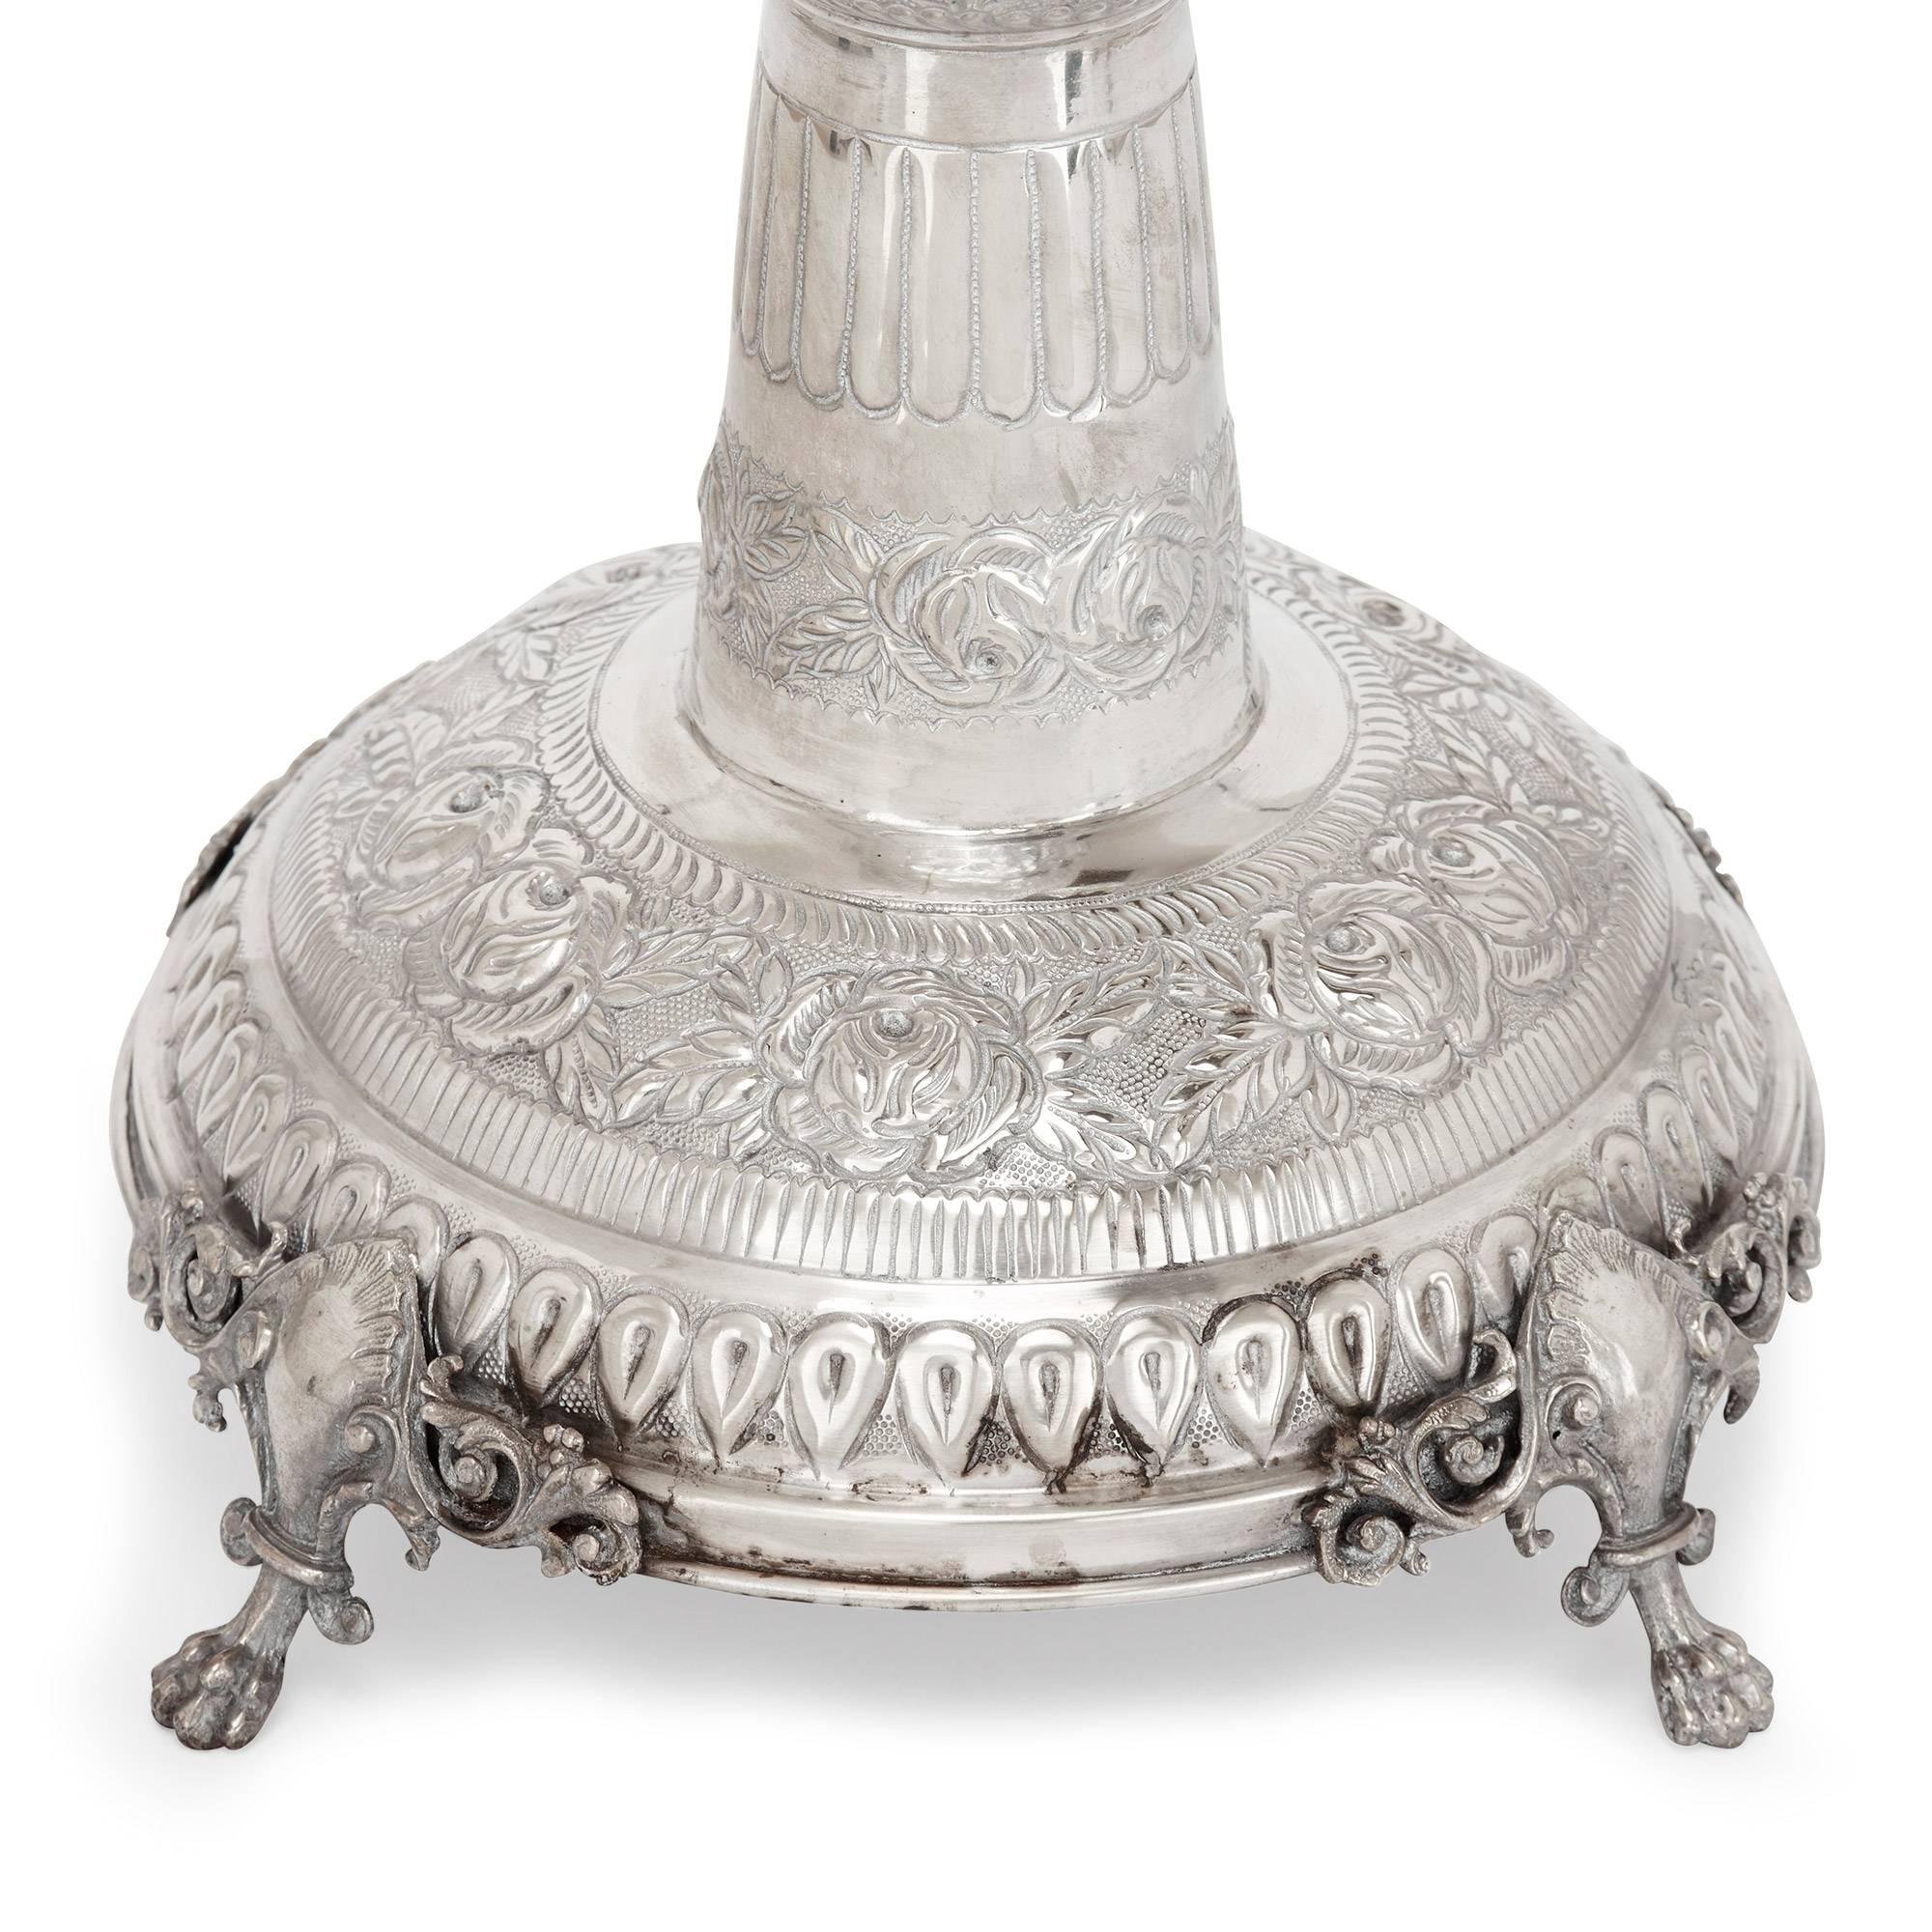 20th Century Antique Judaica Hannukah Menorah in Repousse Silver For Sale